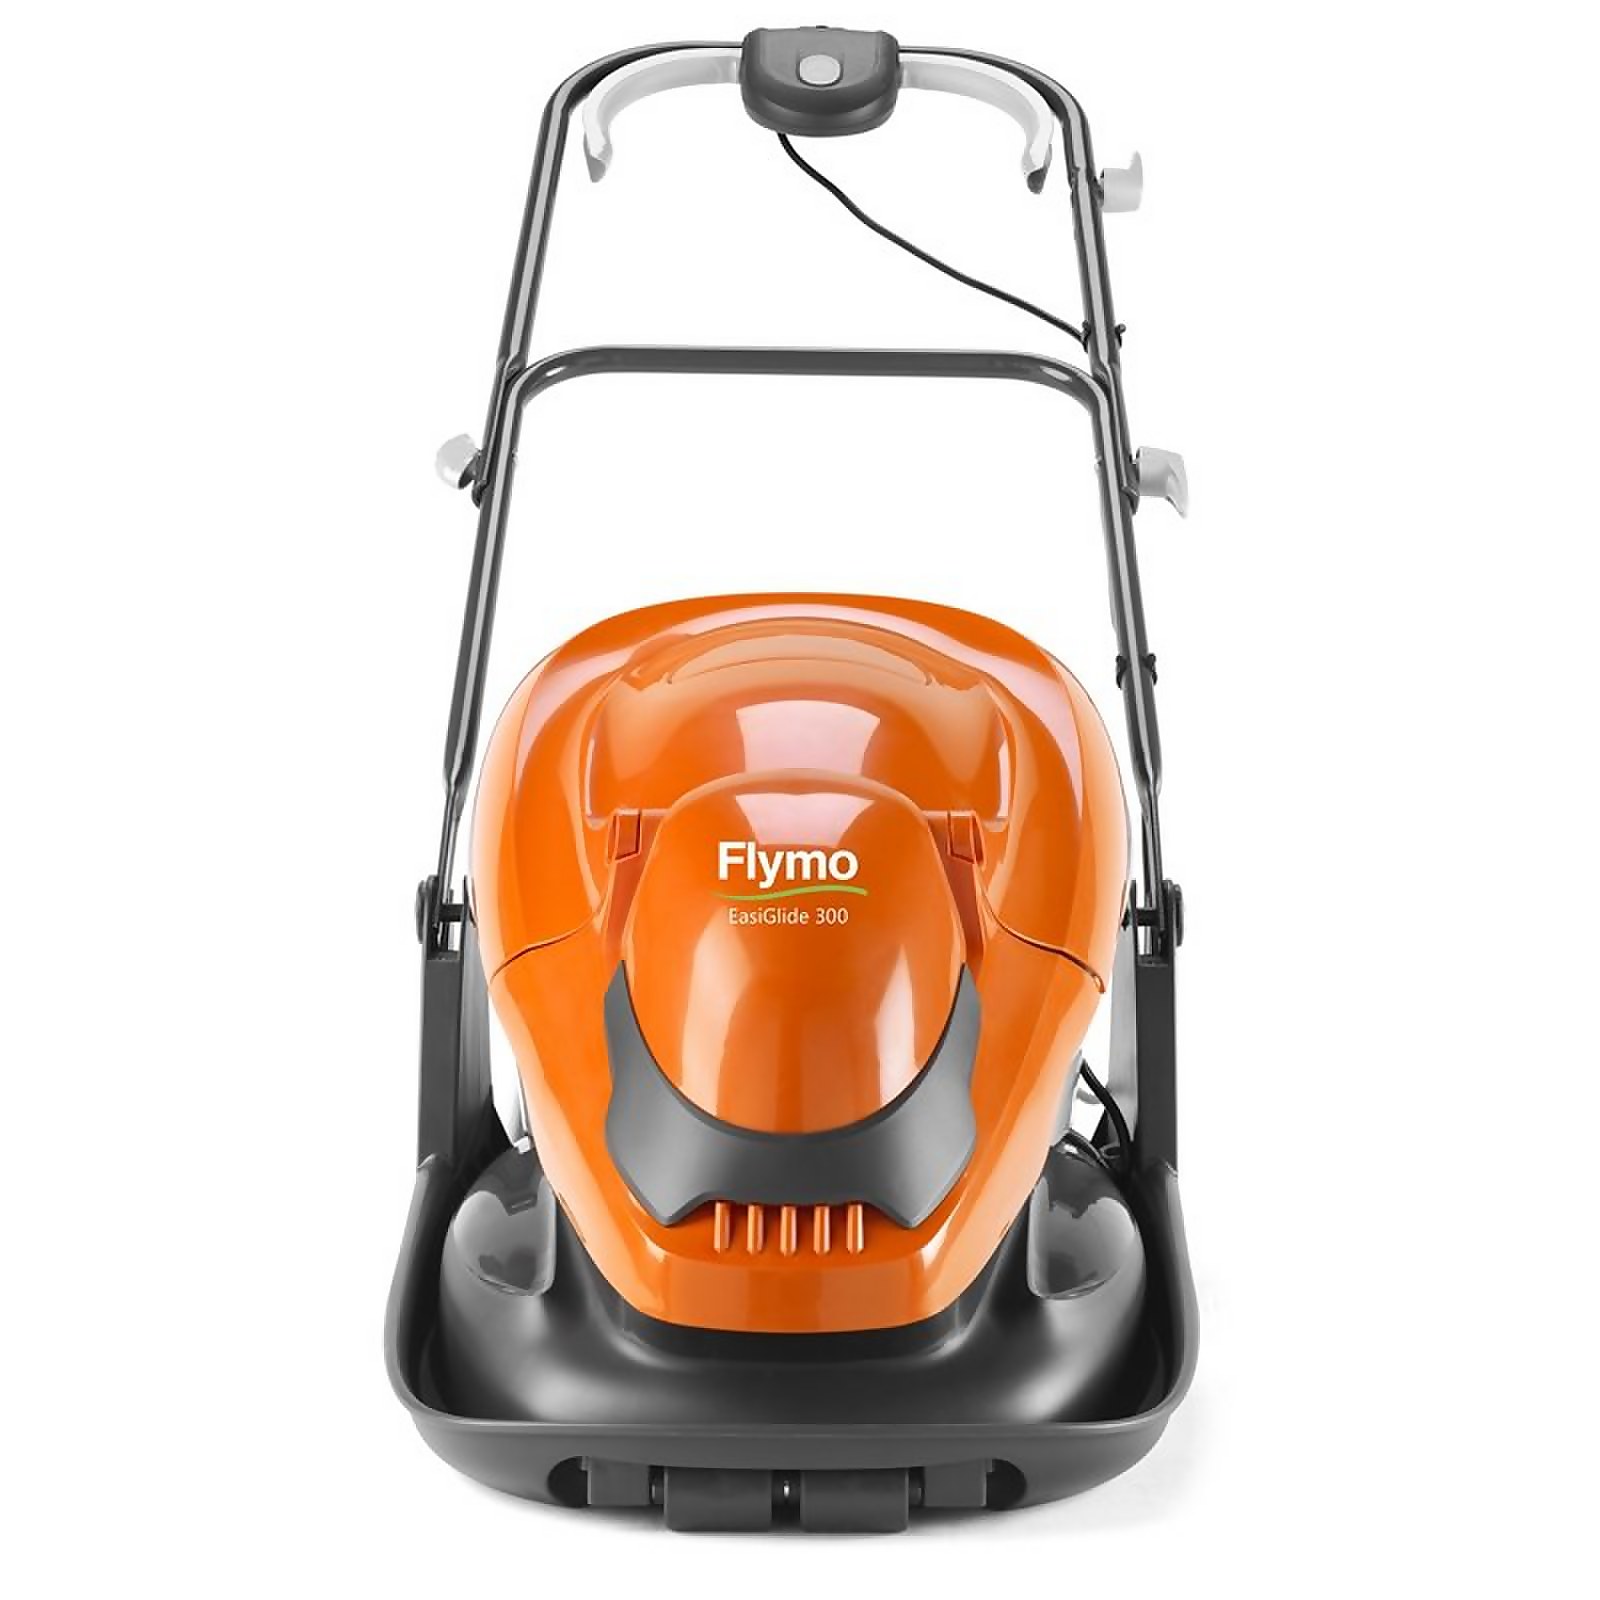 Photo of Flymo Easiglide 300 Hover Lawnmower - 30cm